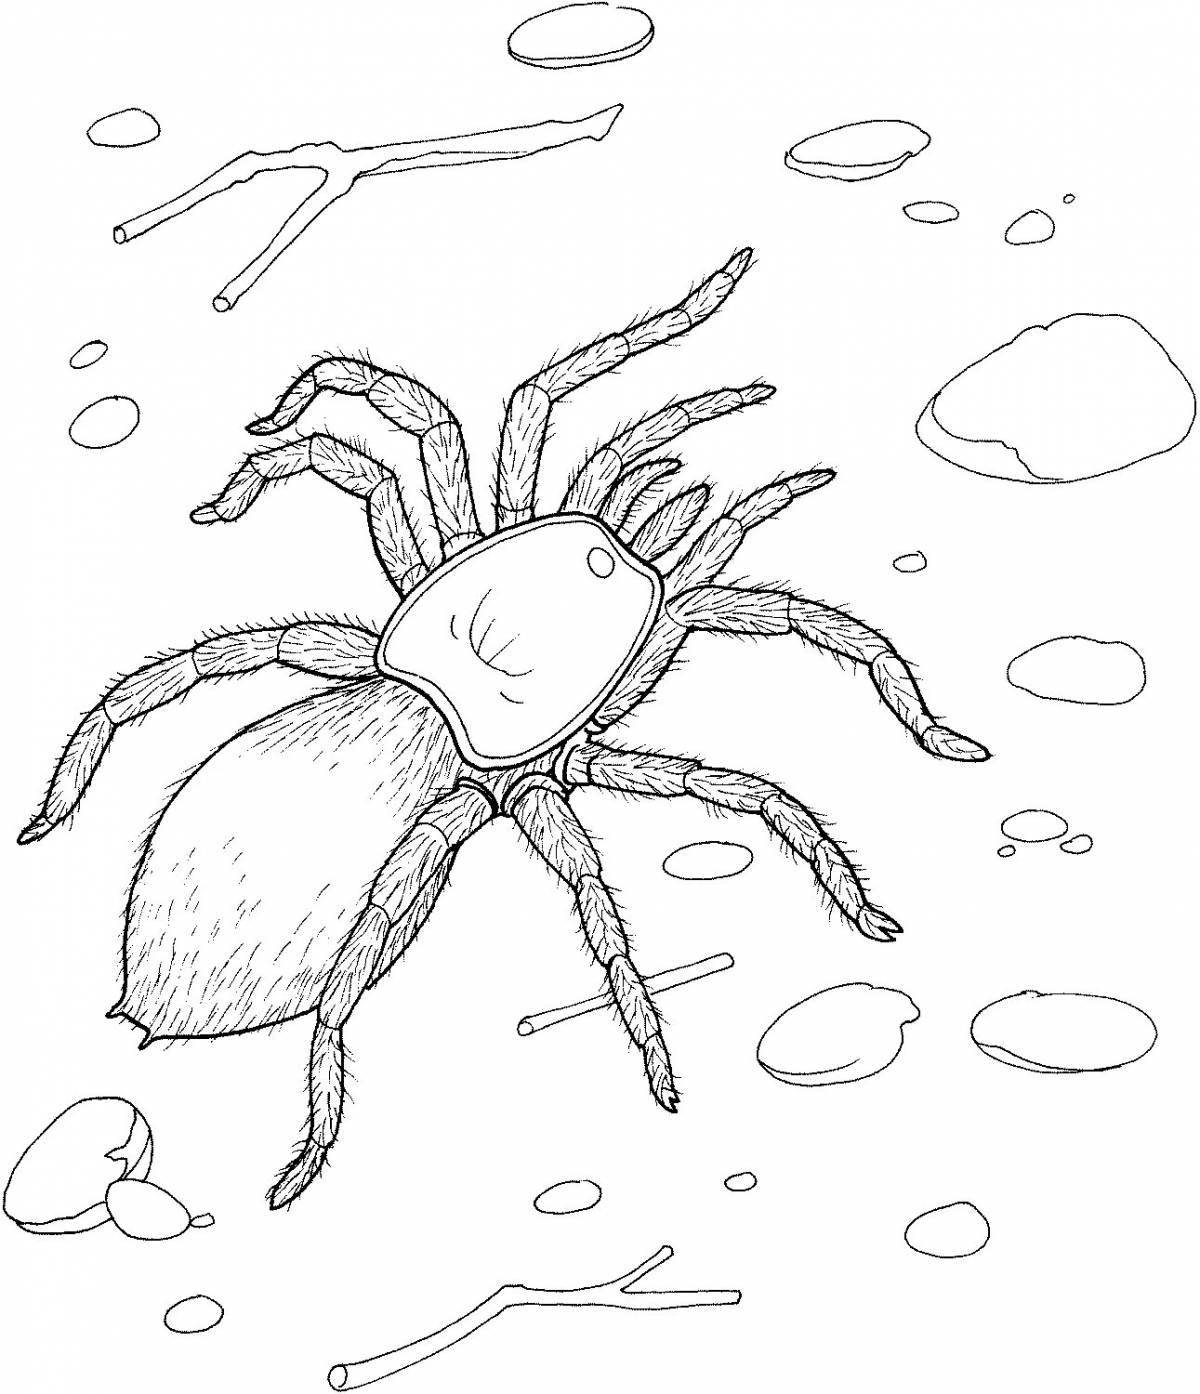 Adorable spider drawing